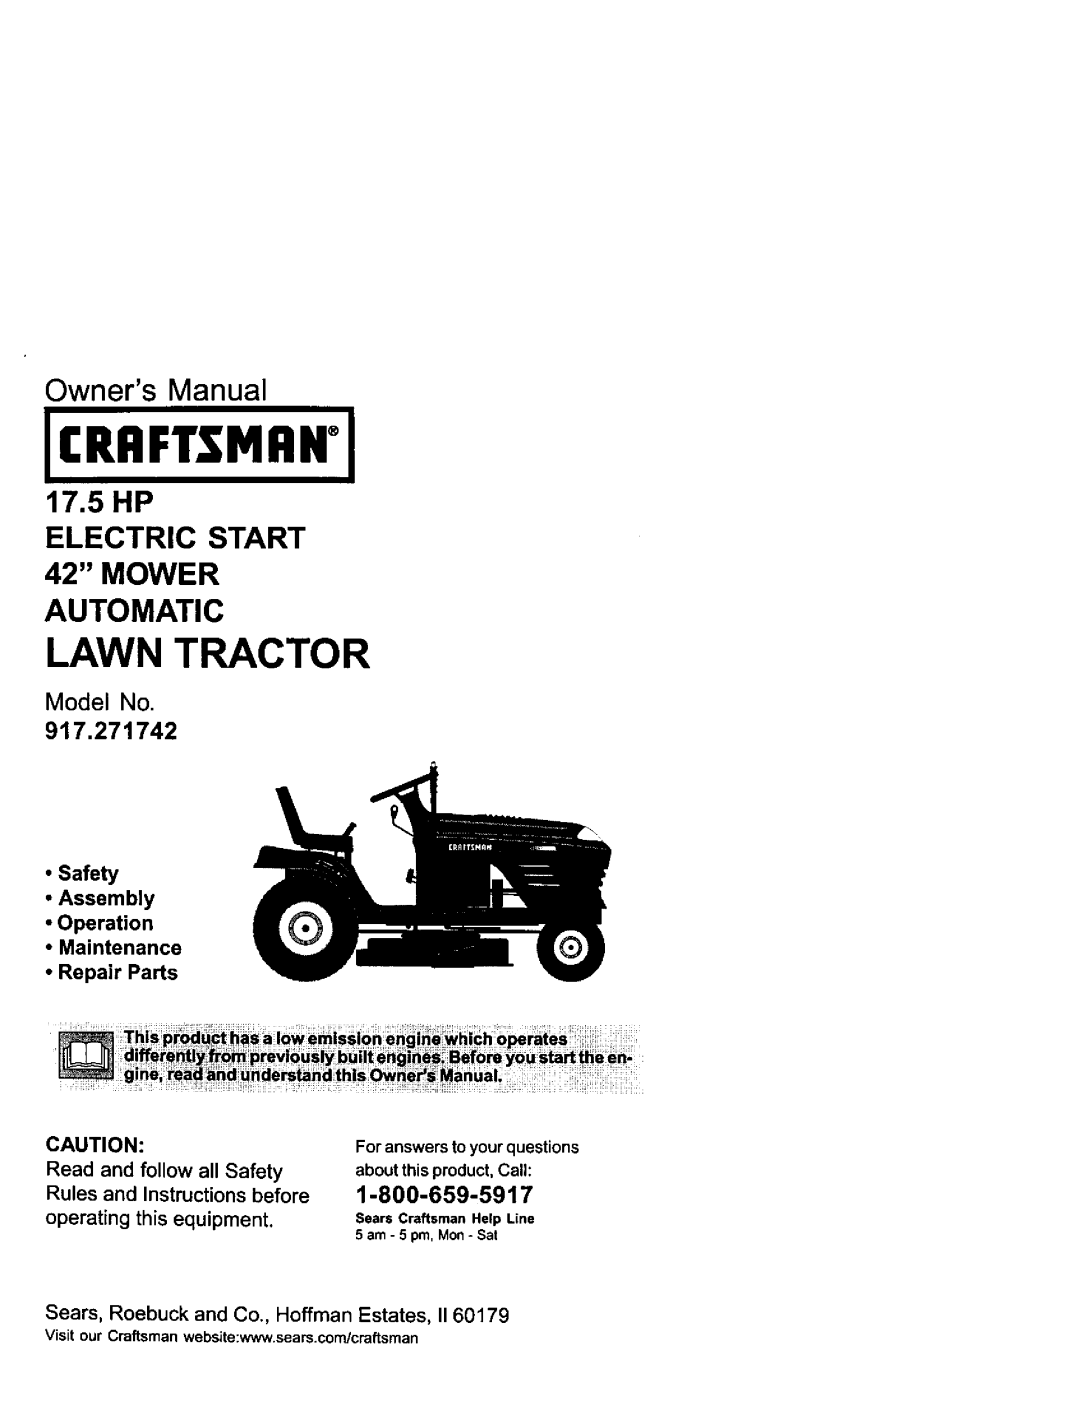 Craftsman 917.271742 owner manual Model No, Safety Assembly Operation Maintenance, Repair Parts, operating this equipment 